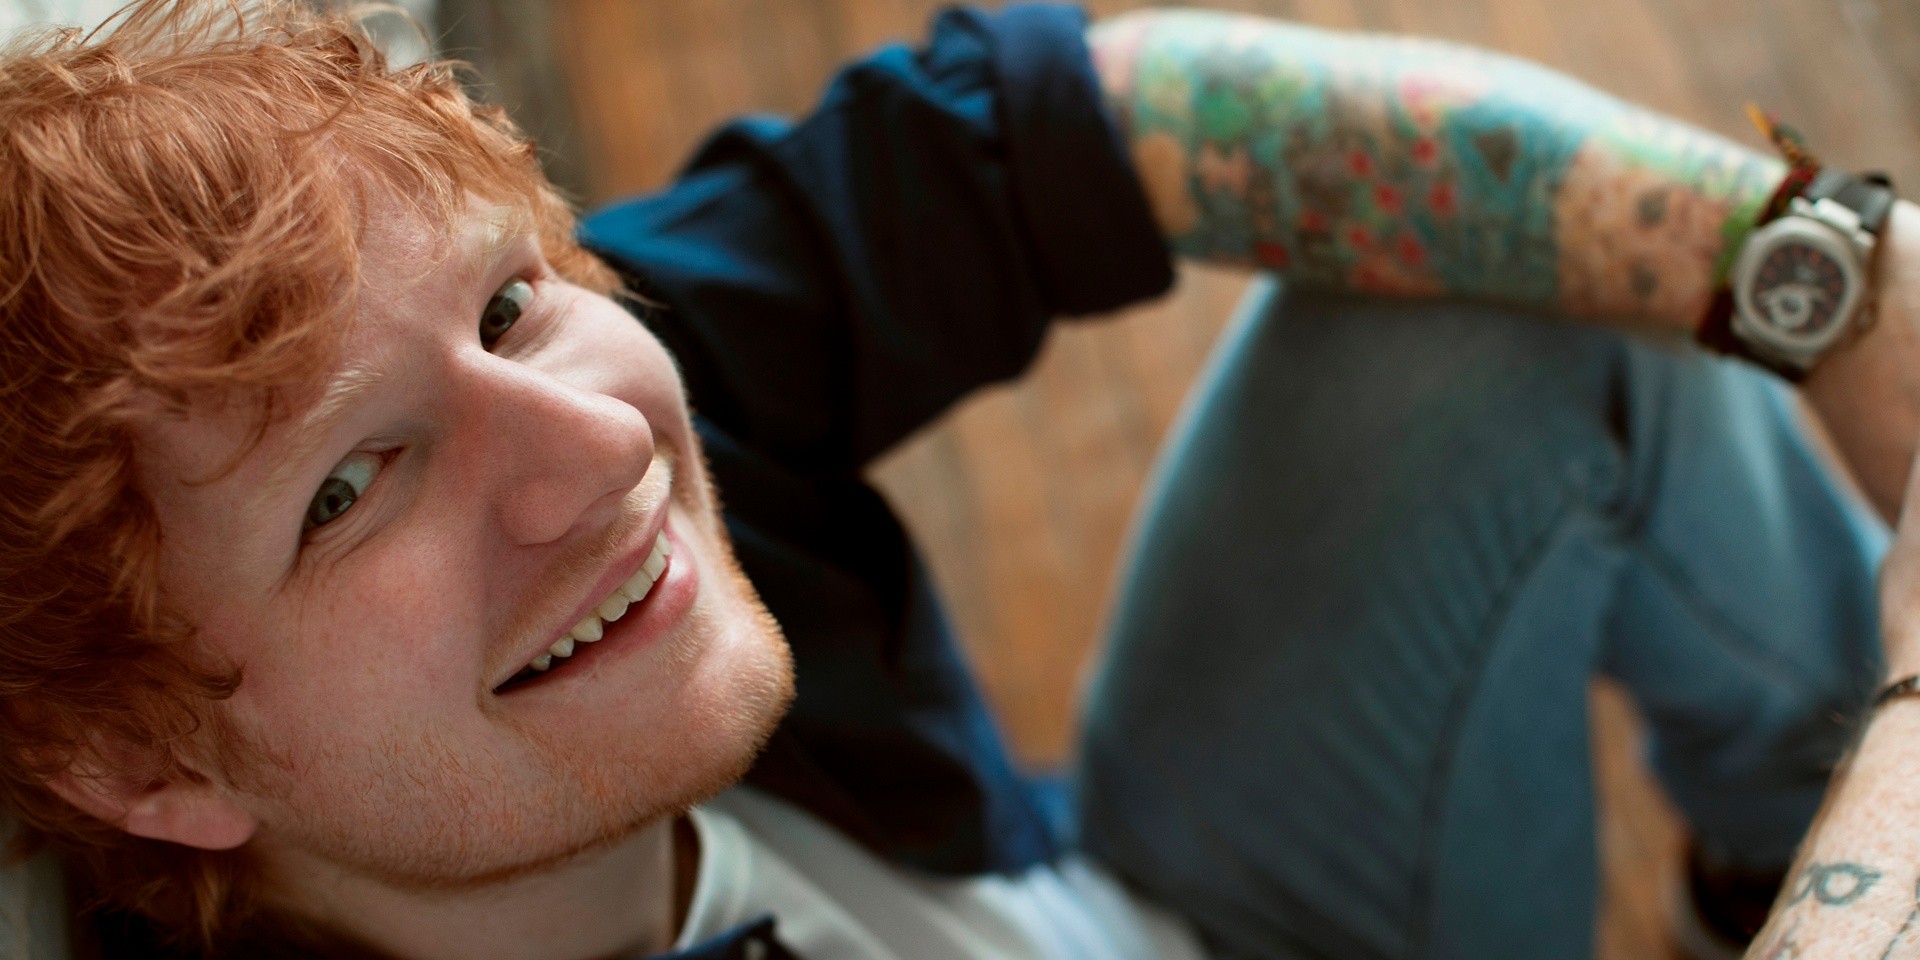 Ed Sheeran announces new album, No.6 Collaborations Project, shares new song – listen